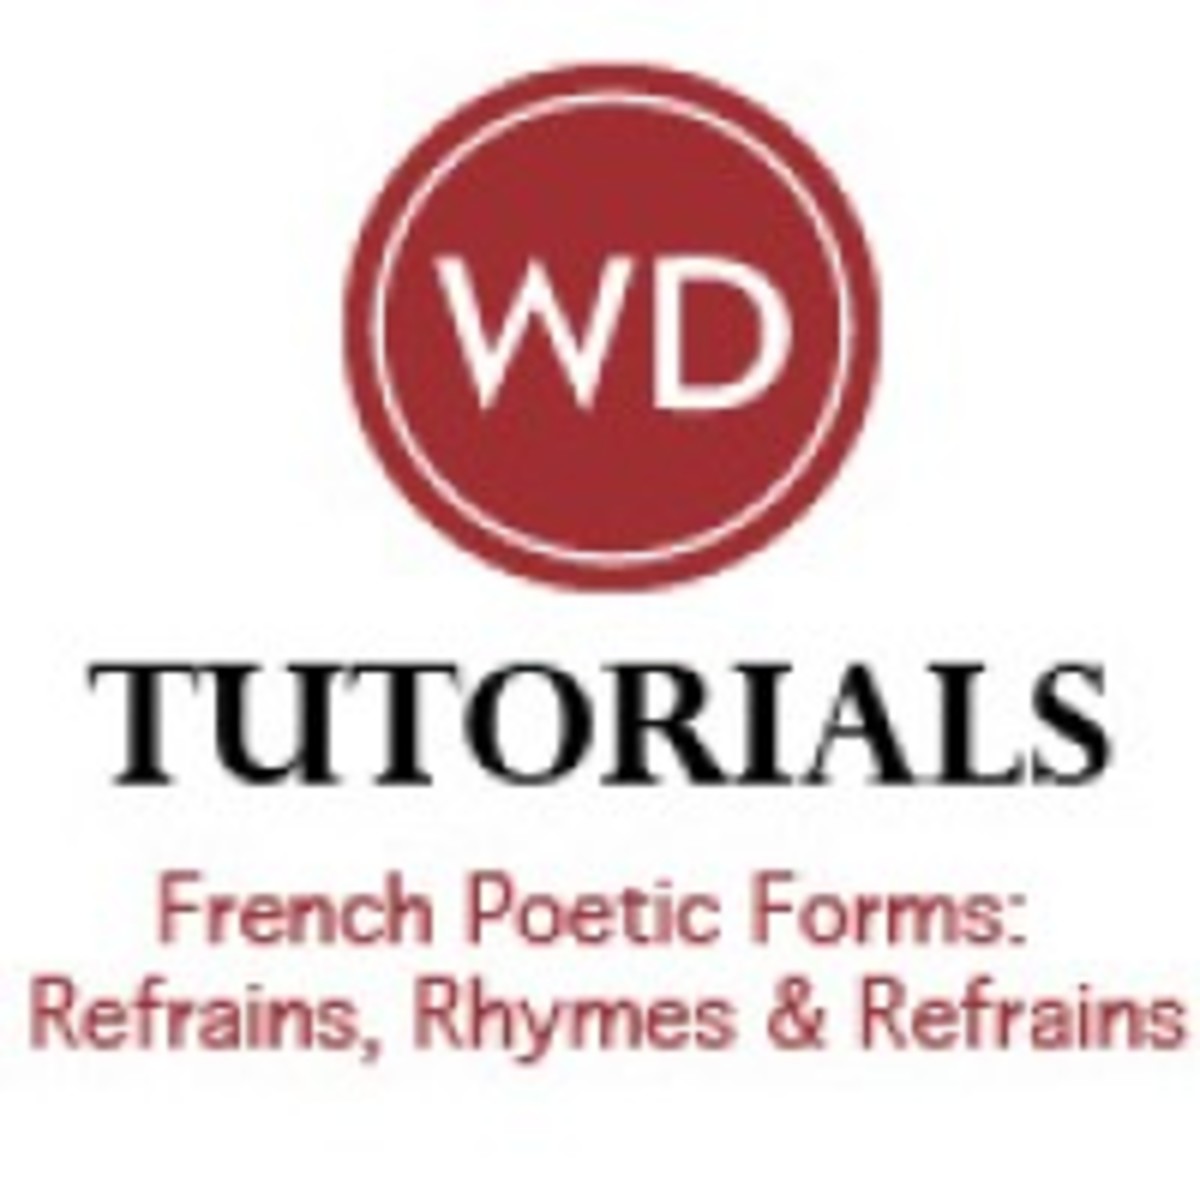 French Poetic Forms